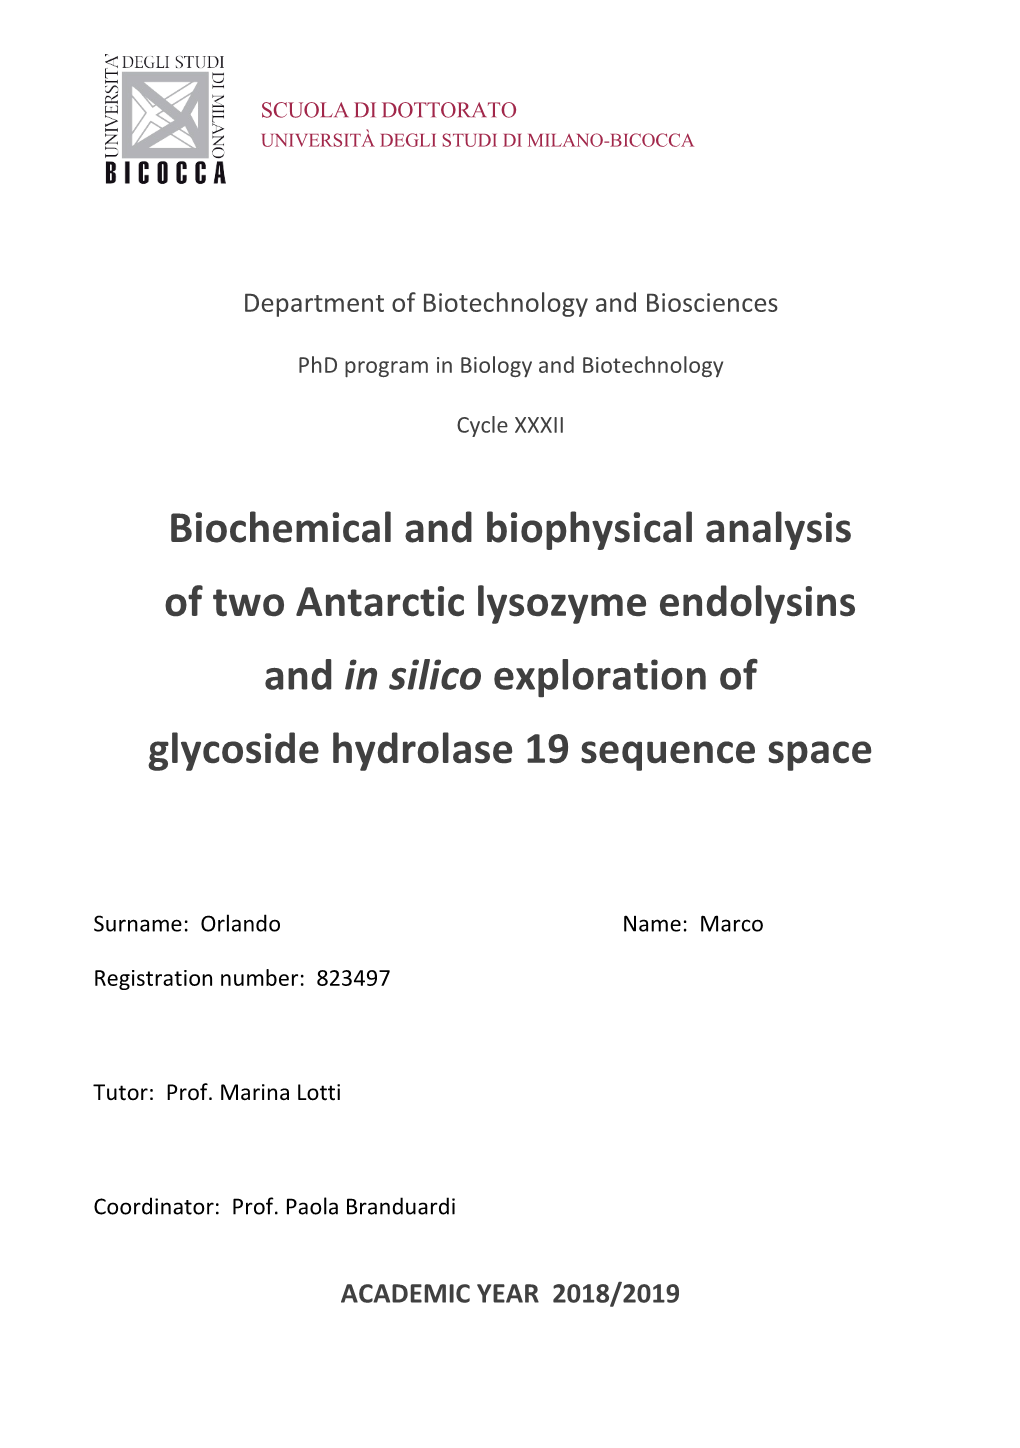 Biochemical and Biophysical Analysis of Two Antarctic Lysozyme Endolysins and in Silico Exploration Of